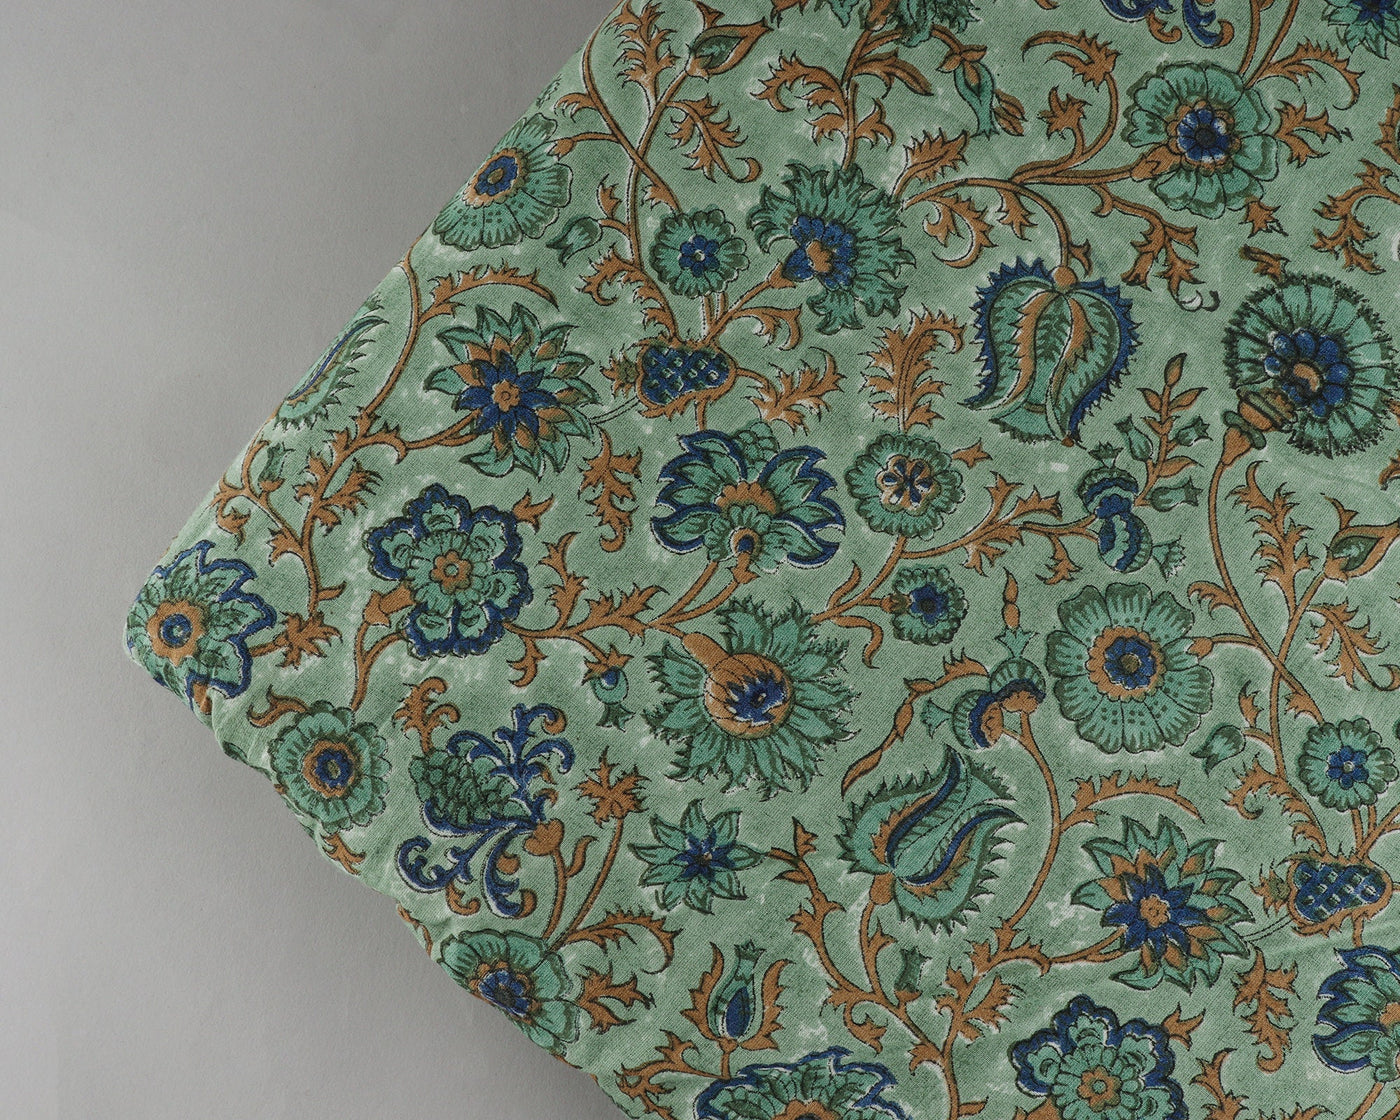 Sage Green, Yale Blue, Peanut Brown Indian Floral Hand Block Printed 100% Pure Cotton Cloth, Fabric by the yard, Women Clothing Curtain Bags